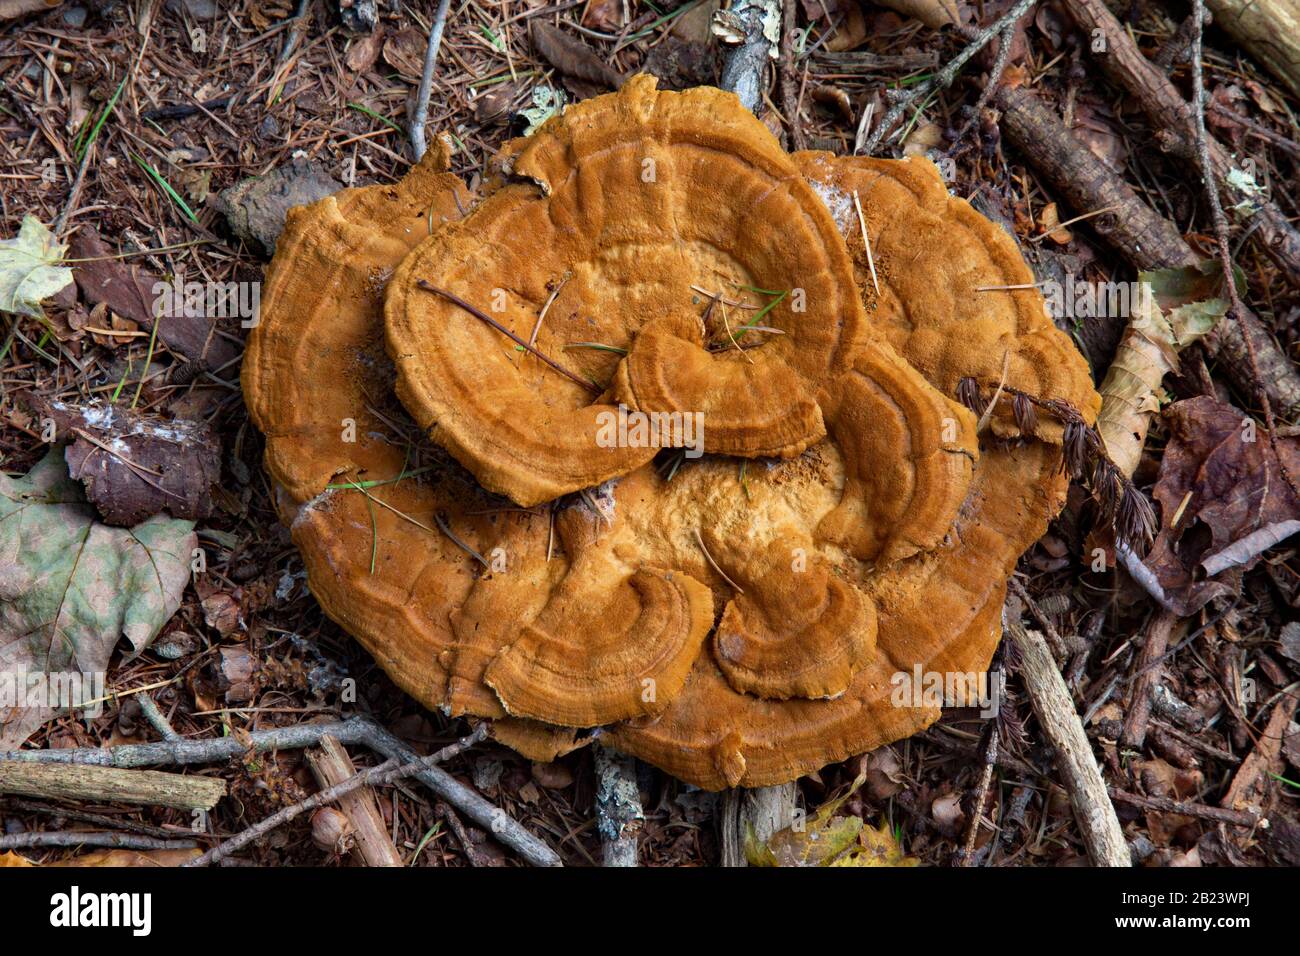 Thin-maze Flat Polypore, an inedible fungus, is often found growing in the vicinity of conifer trees. Stock Photo